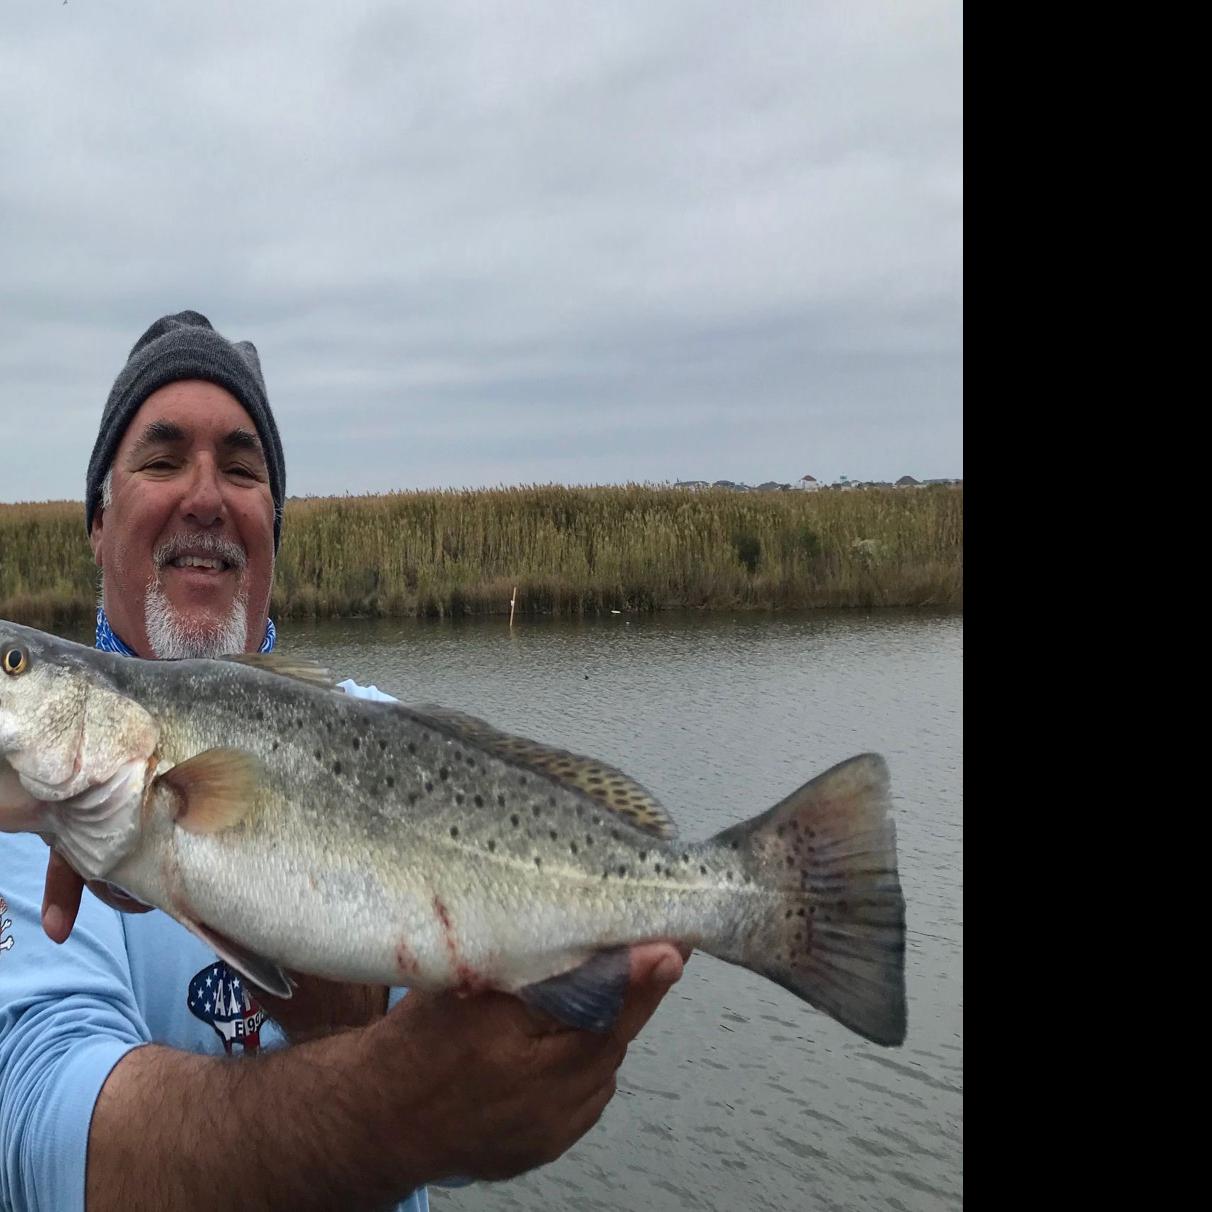 This channel is a winter wonderland for speckled trout, Louisiana Outdoors